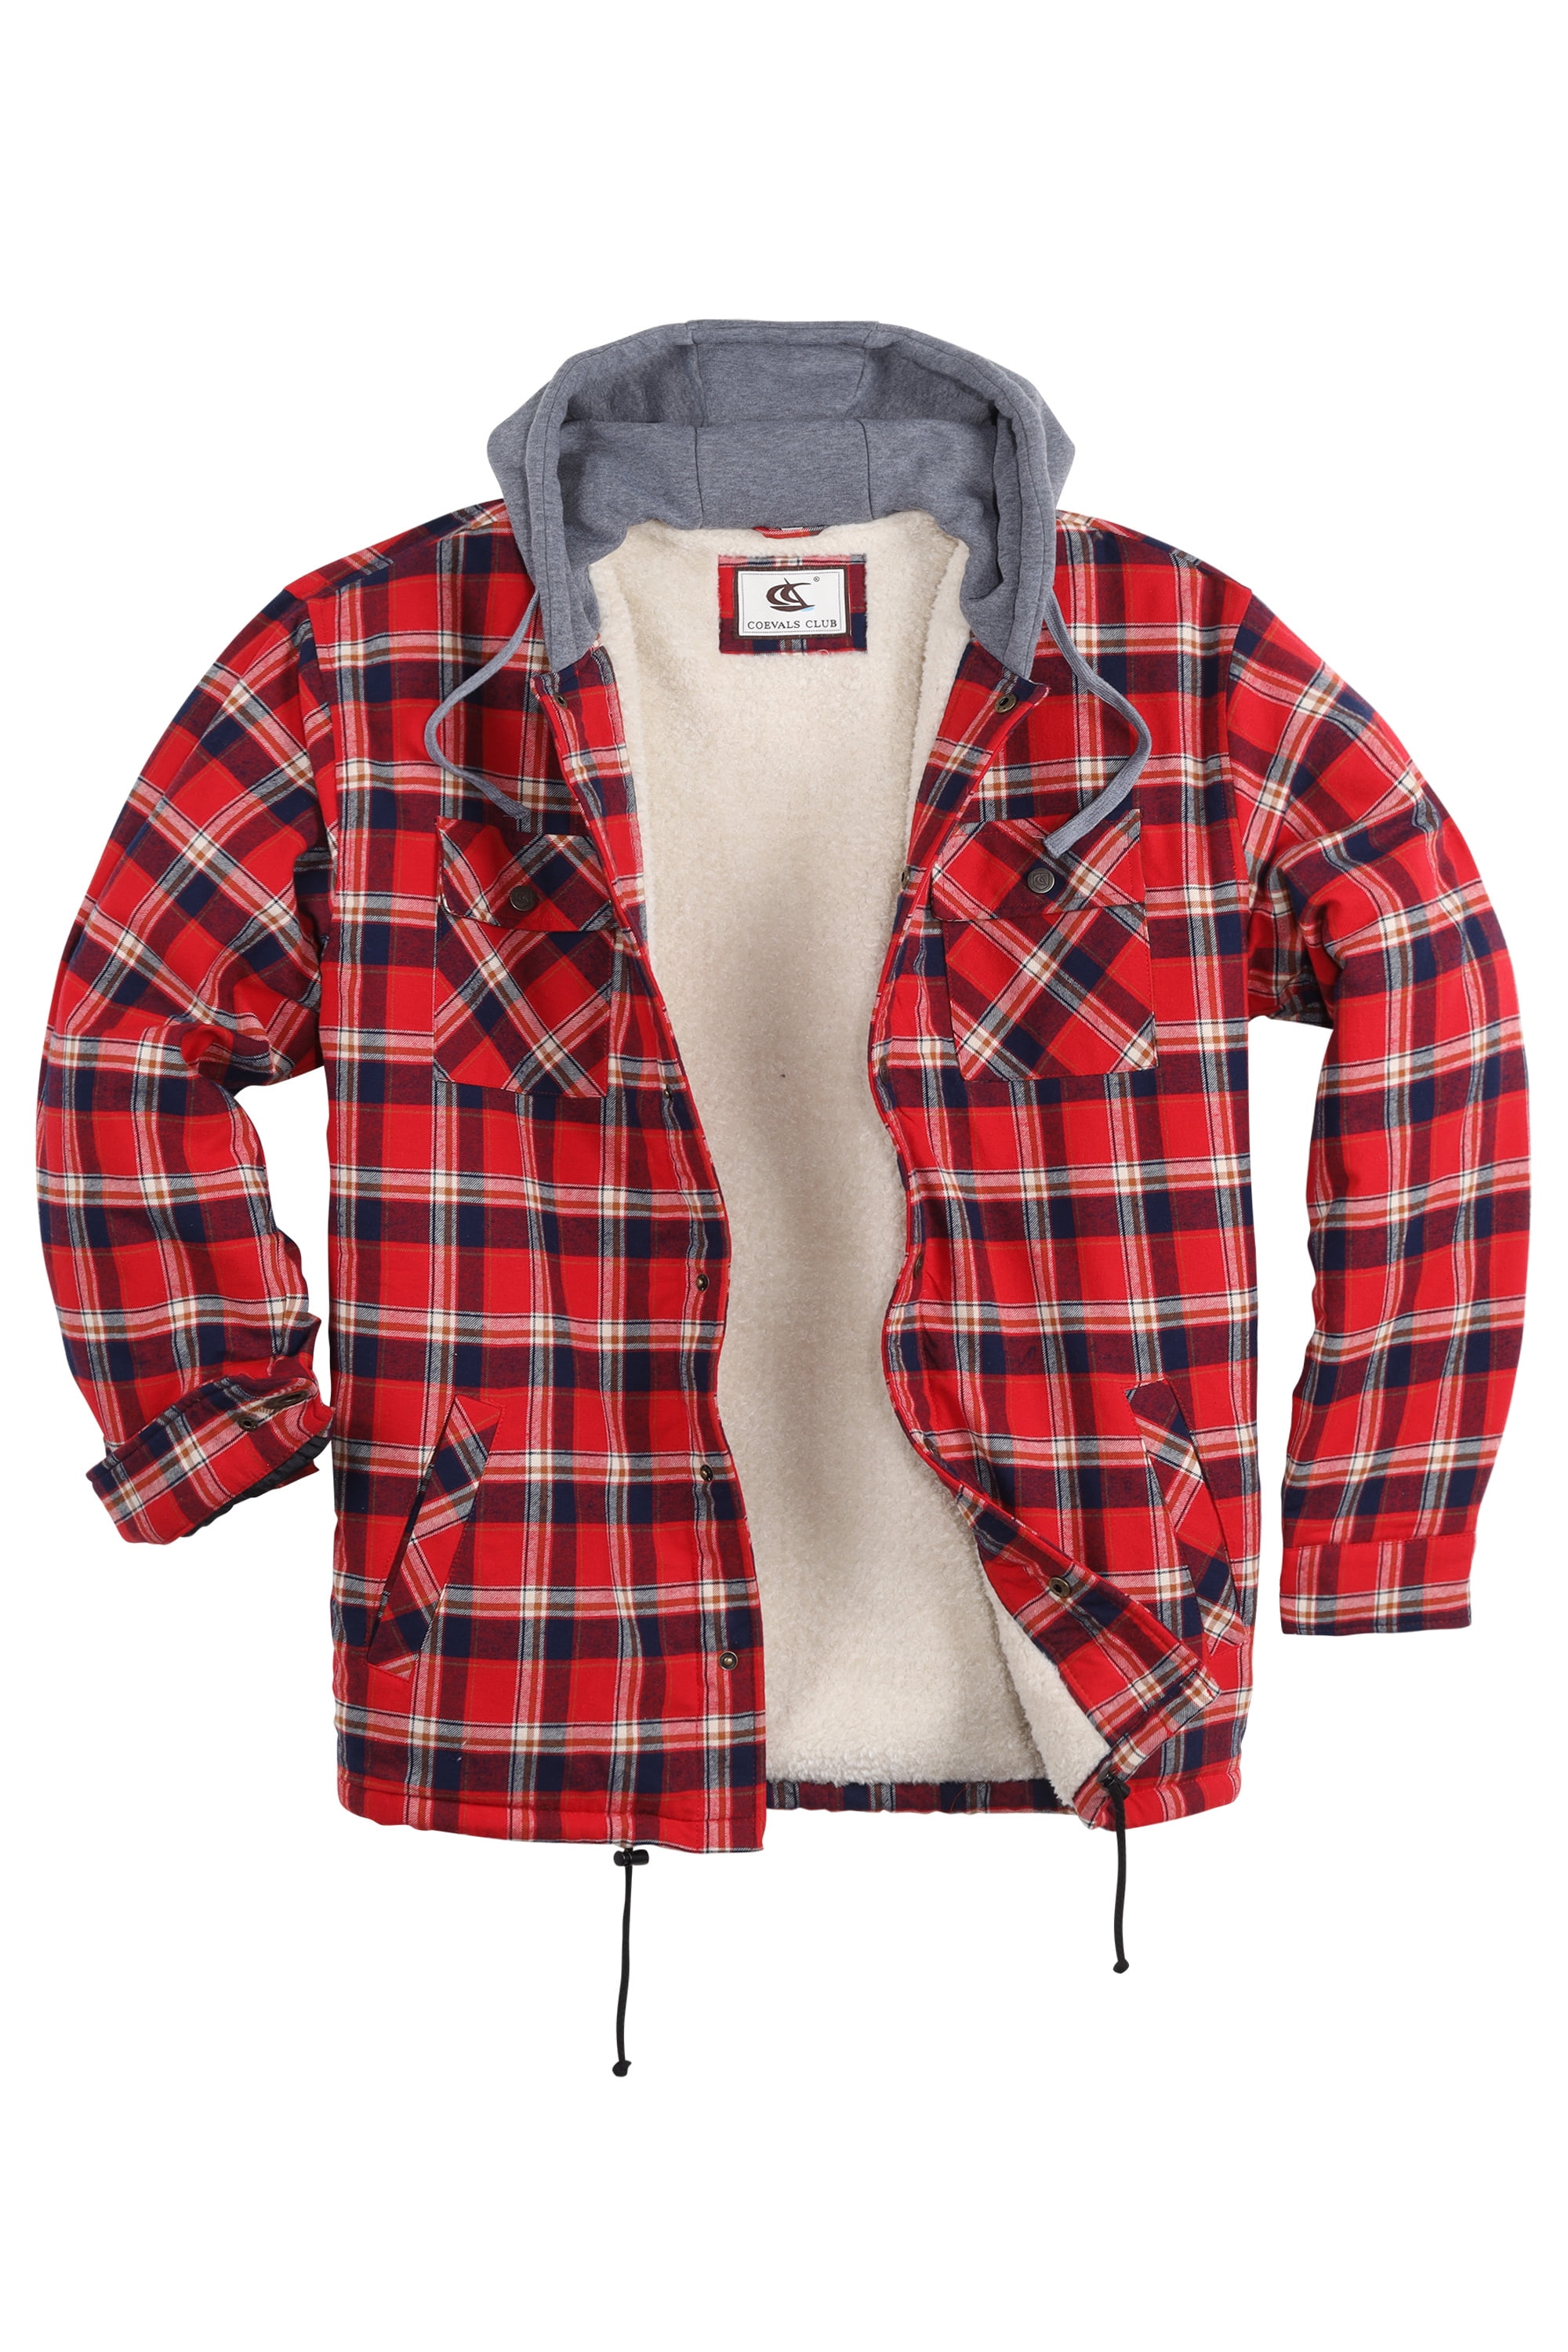 COEVALS CLUB Men's Hooded Sherpa Lined Flannel Long Sleeve Cotton Plaid ...